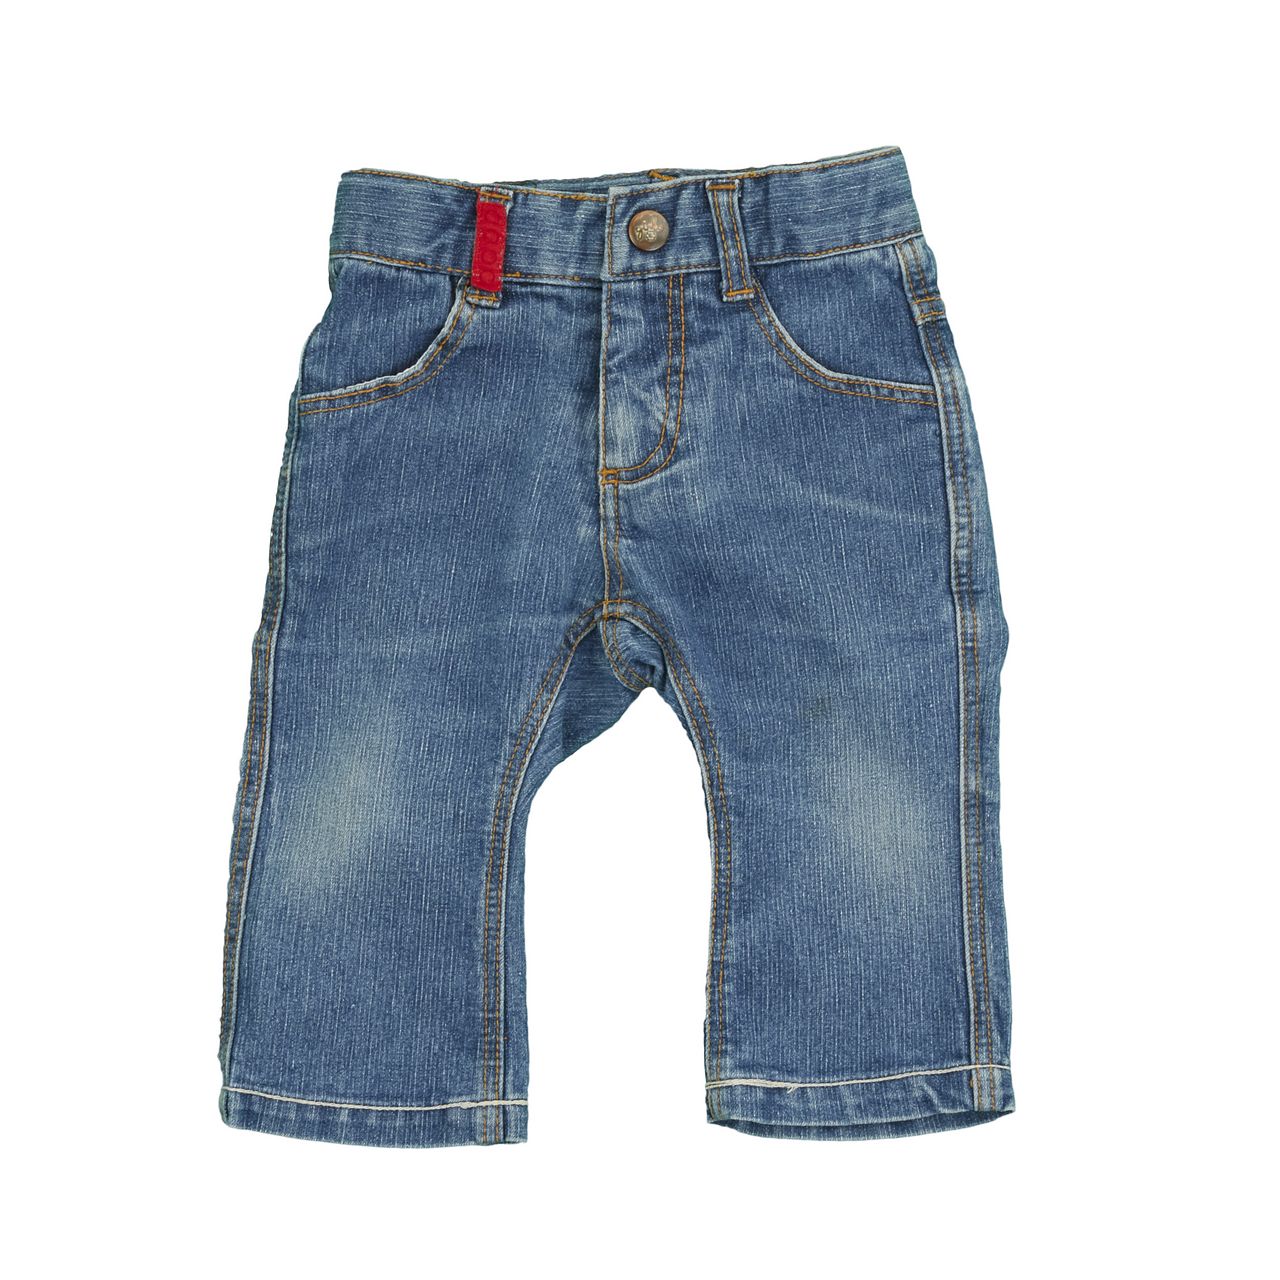 Lego Wear Jeans 74 cm front preview